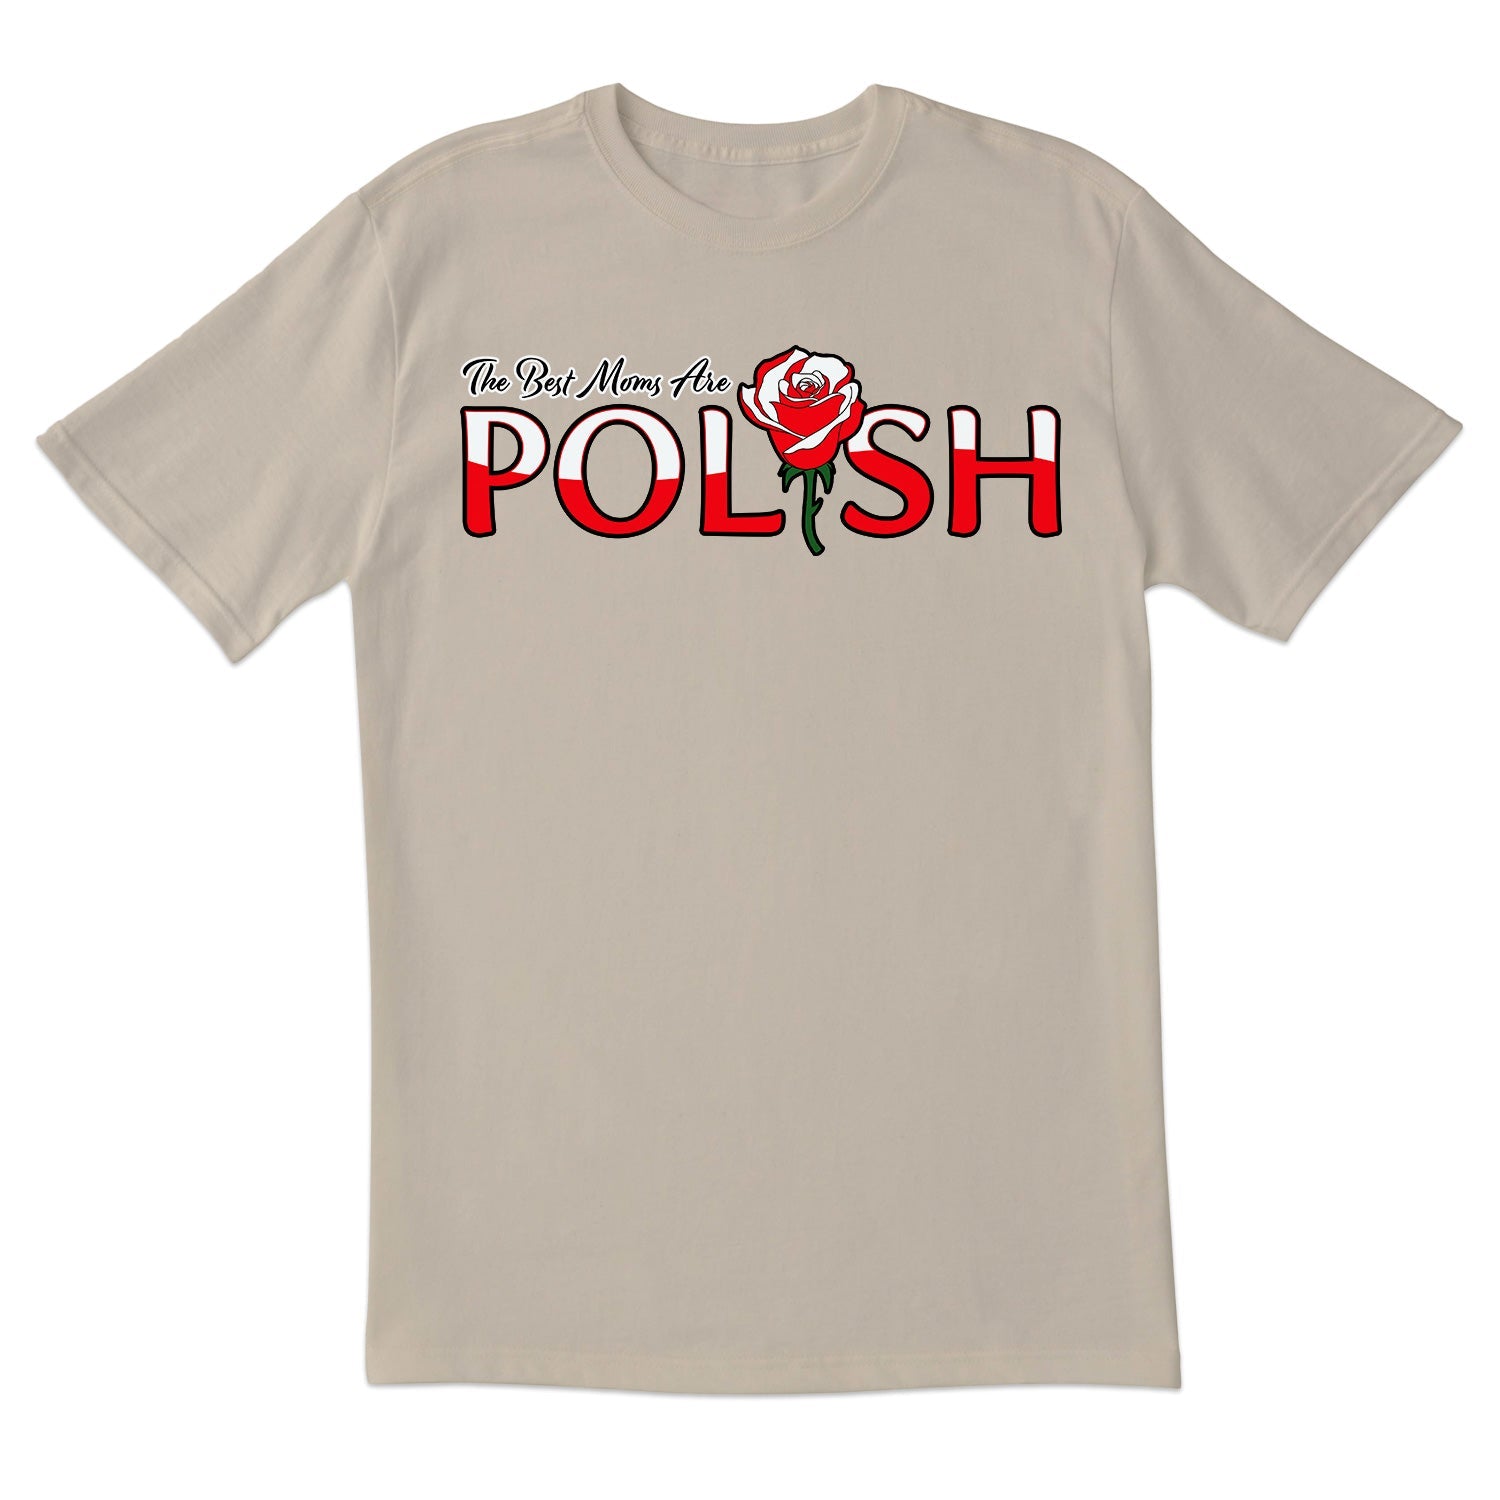 Clearance - "The Best Moms Are Polish" Unisex Short Sleeve TShirt - Sand Size 2XL